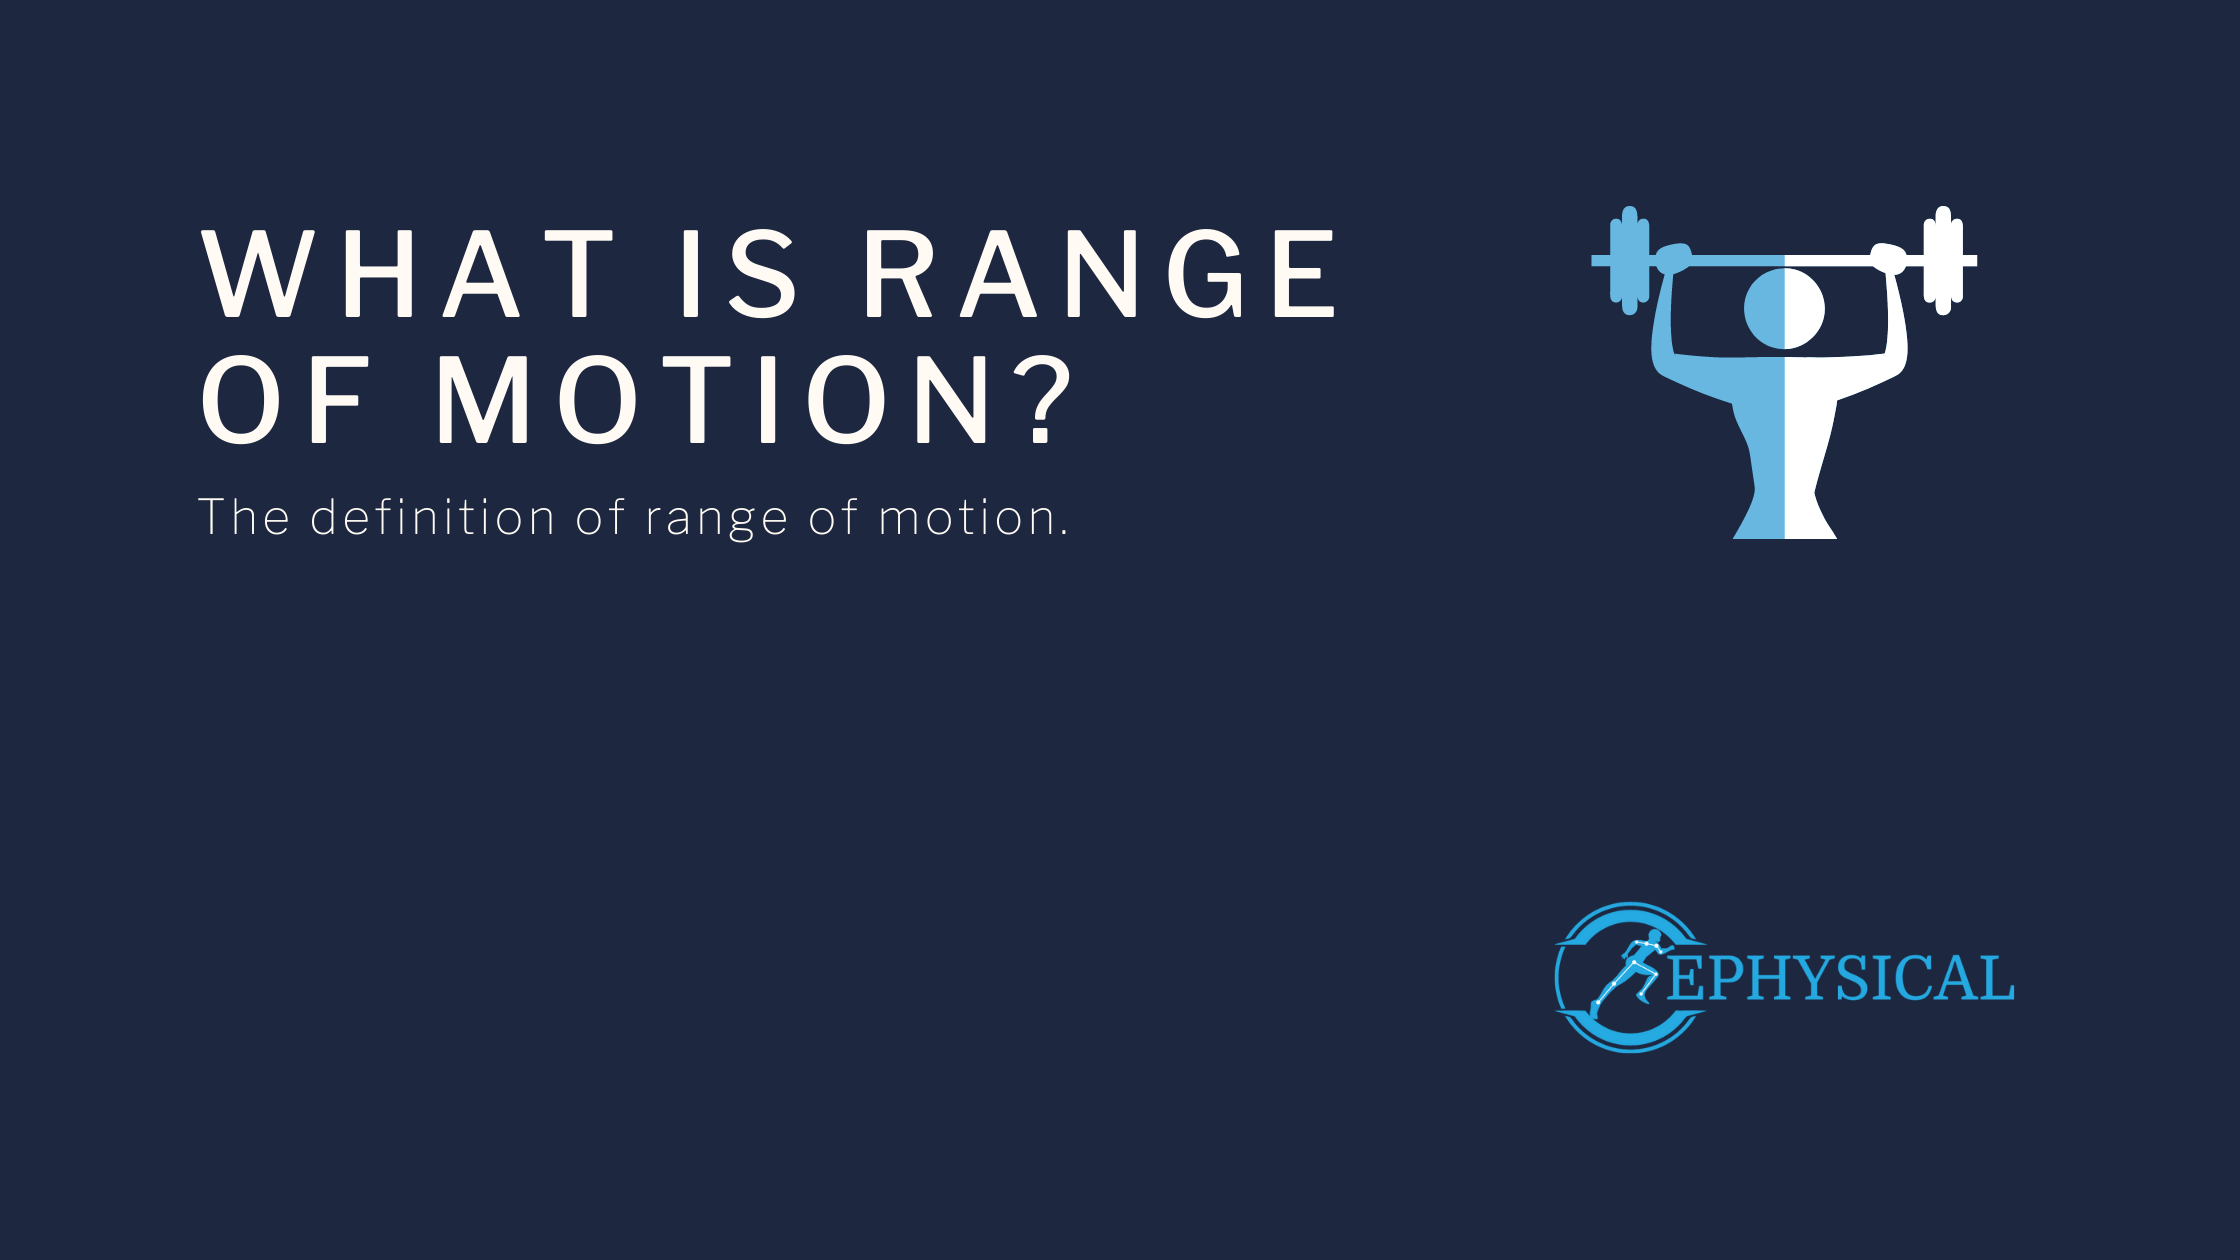 What is range of motion ephysical